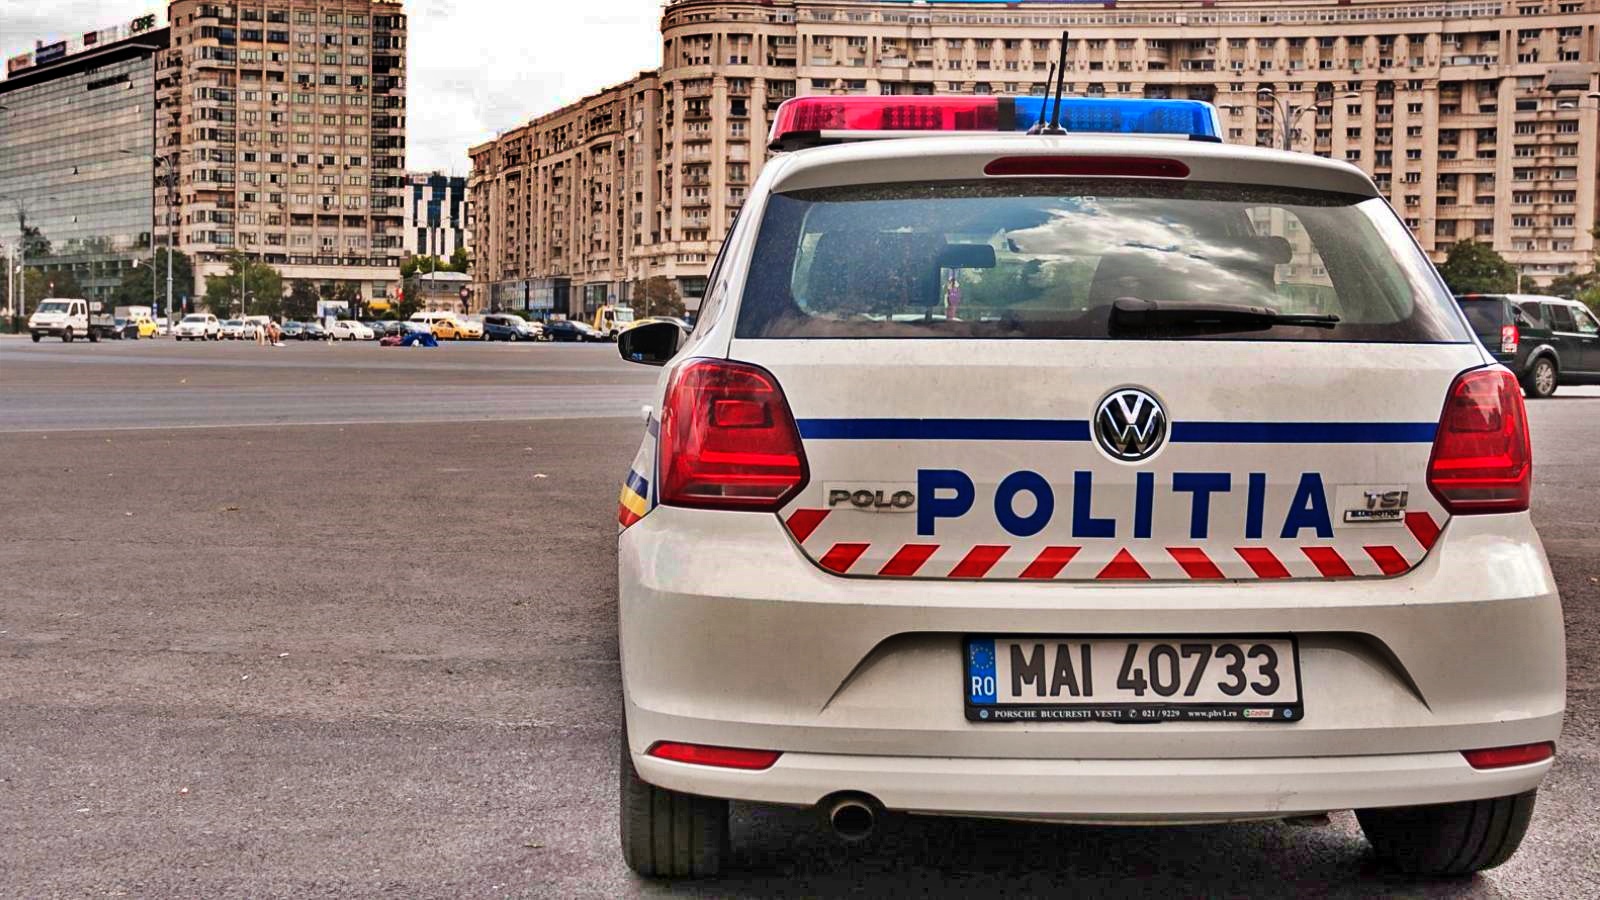 Romanian Police The message for millions of Romanians all over the country